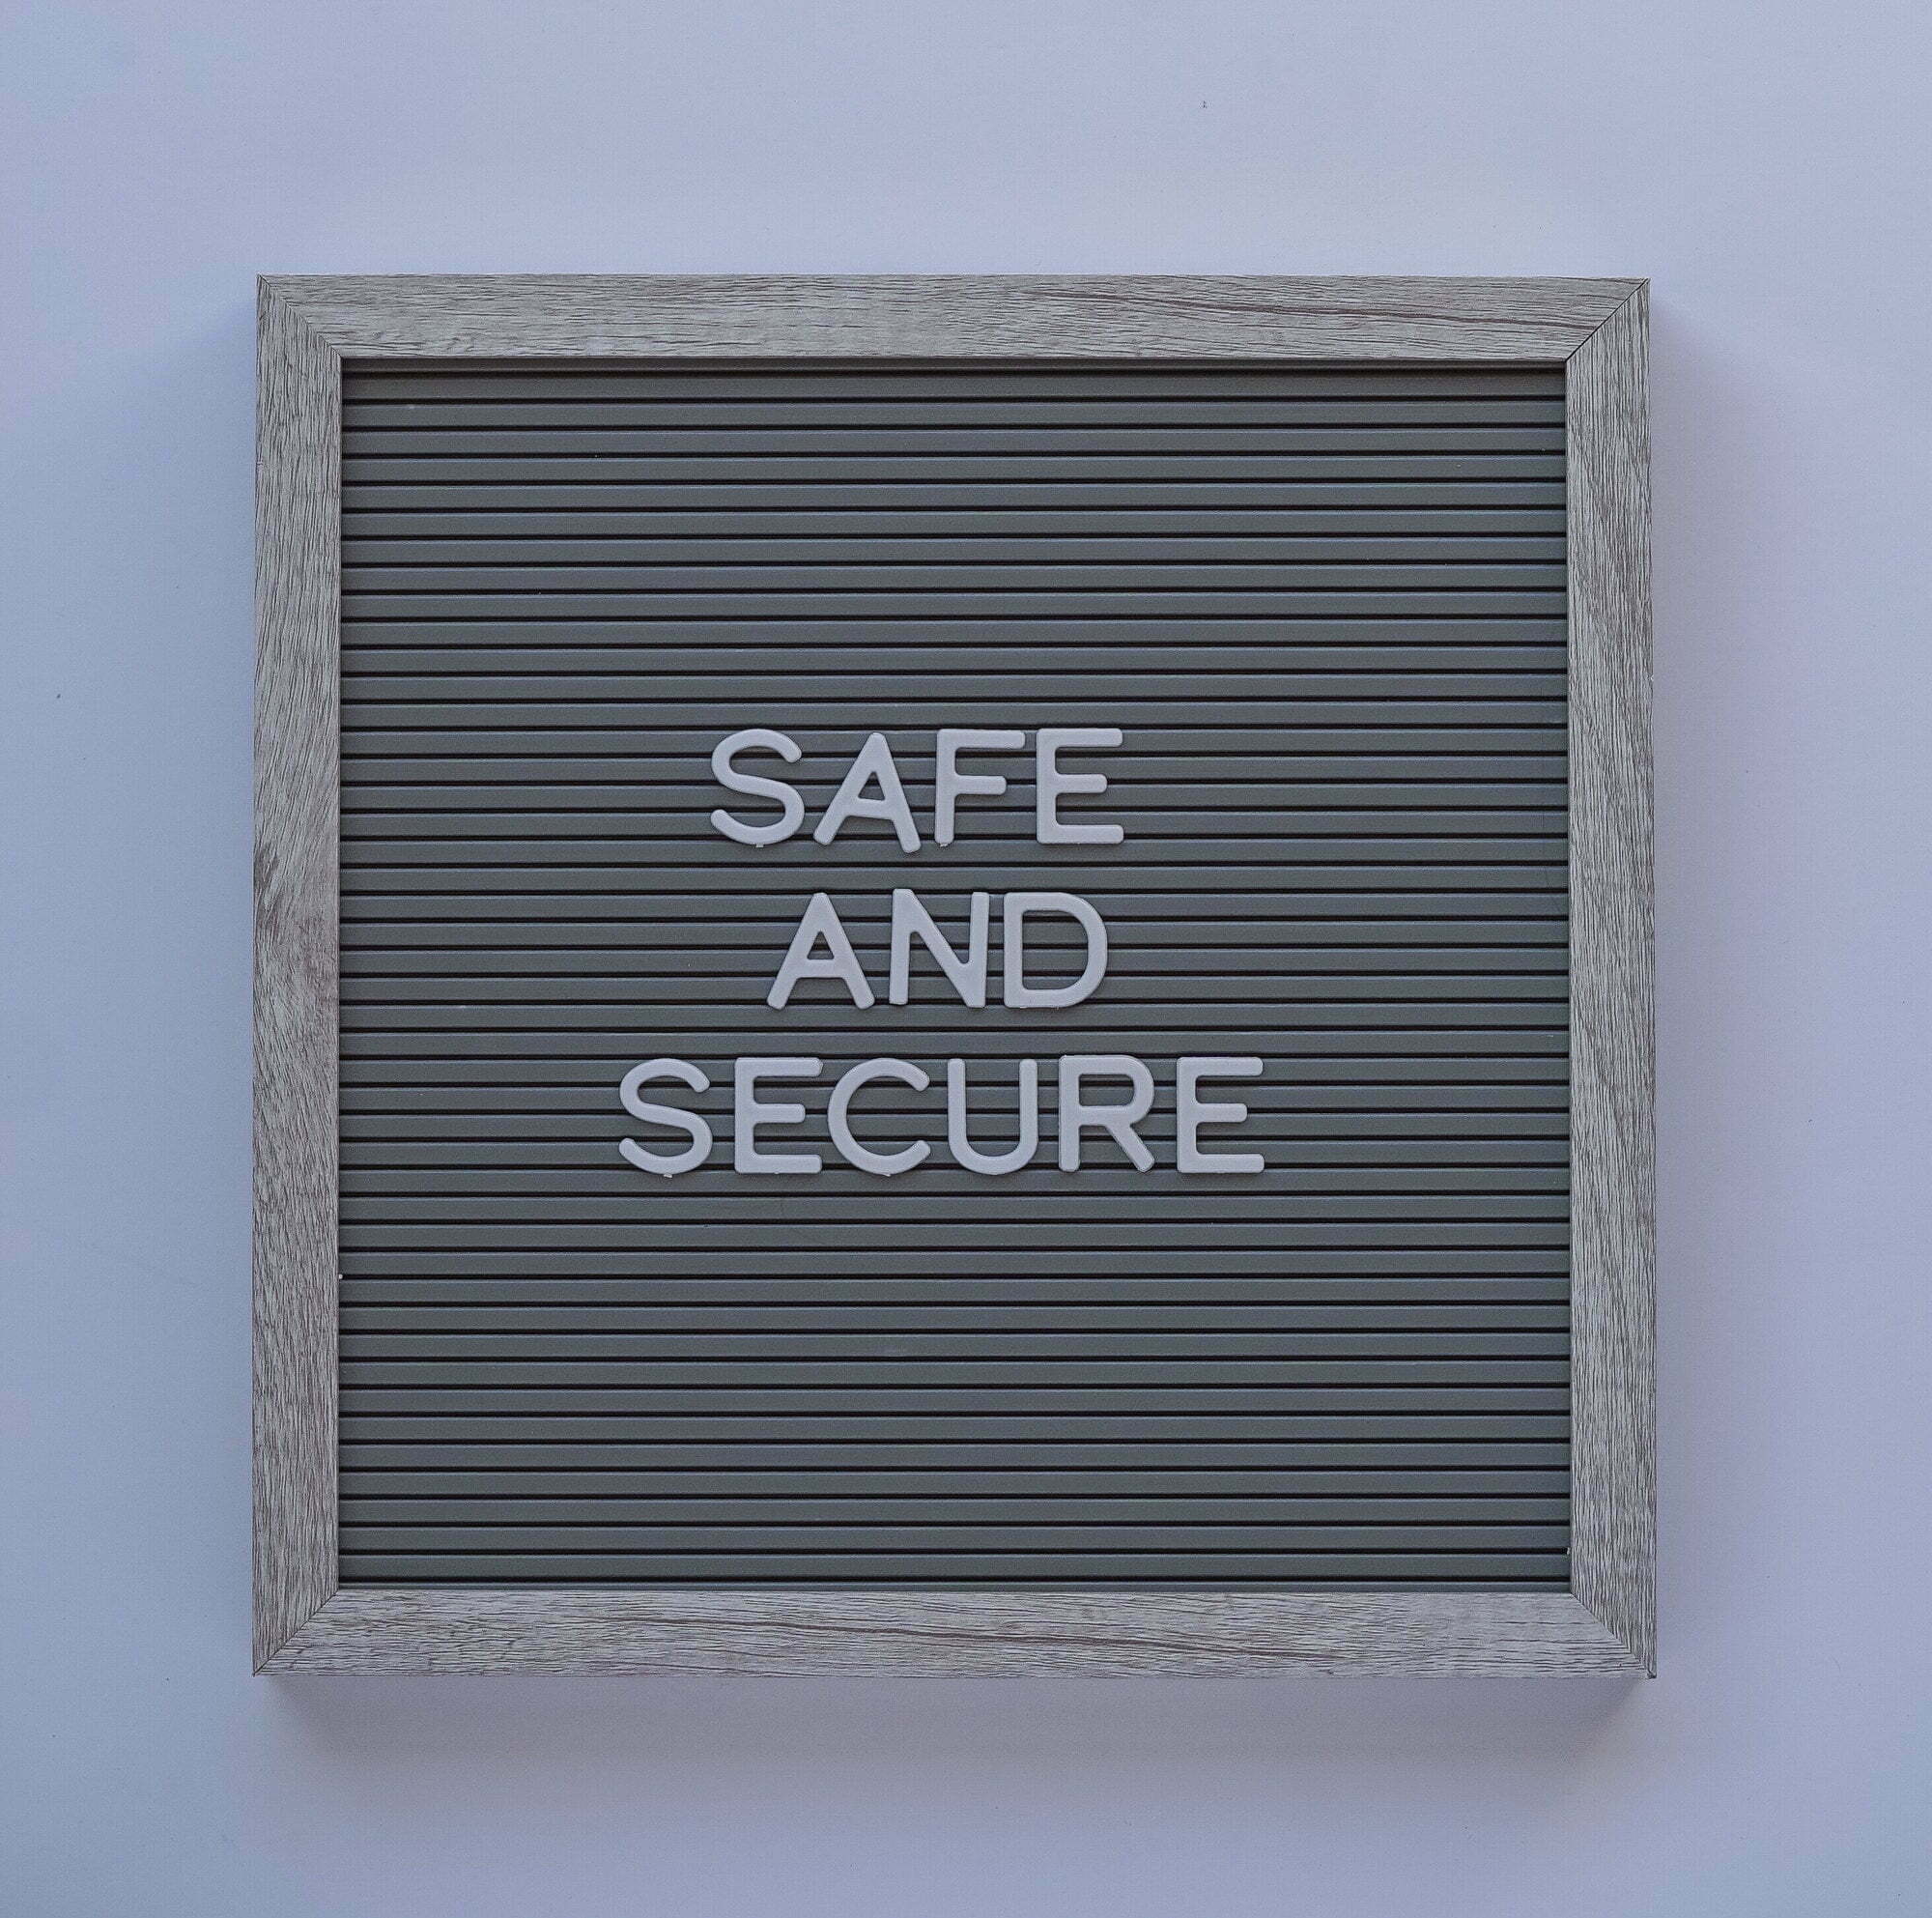 safe and secure on a message board